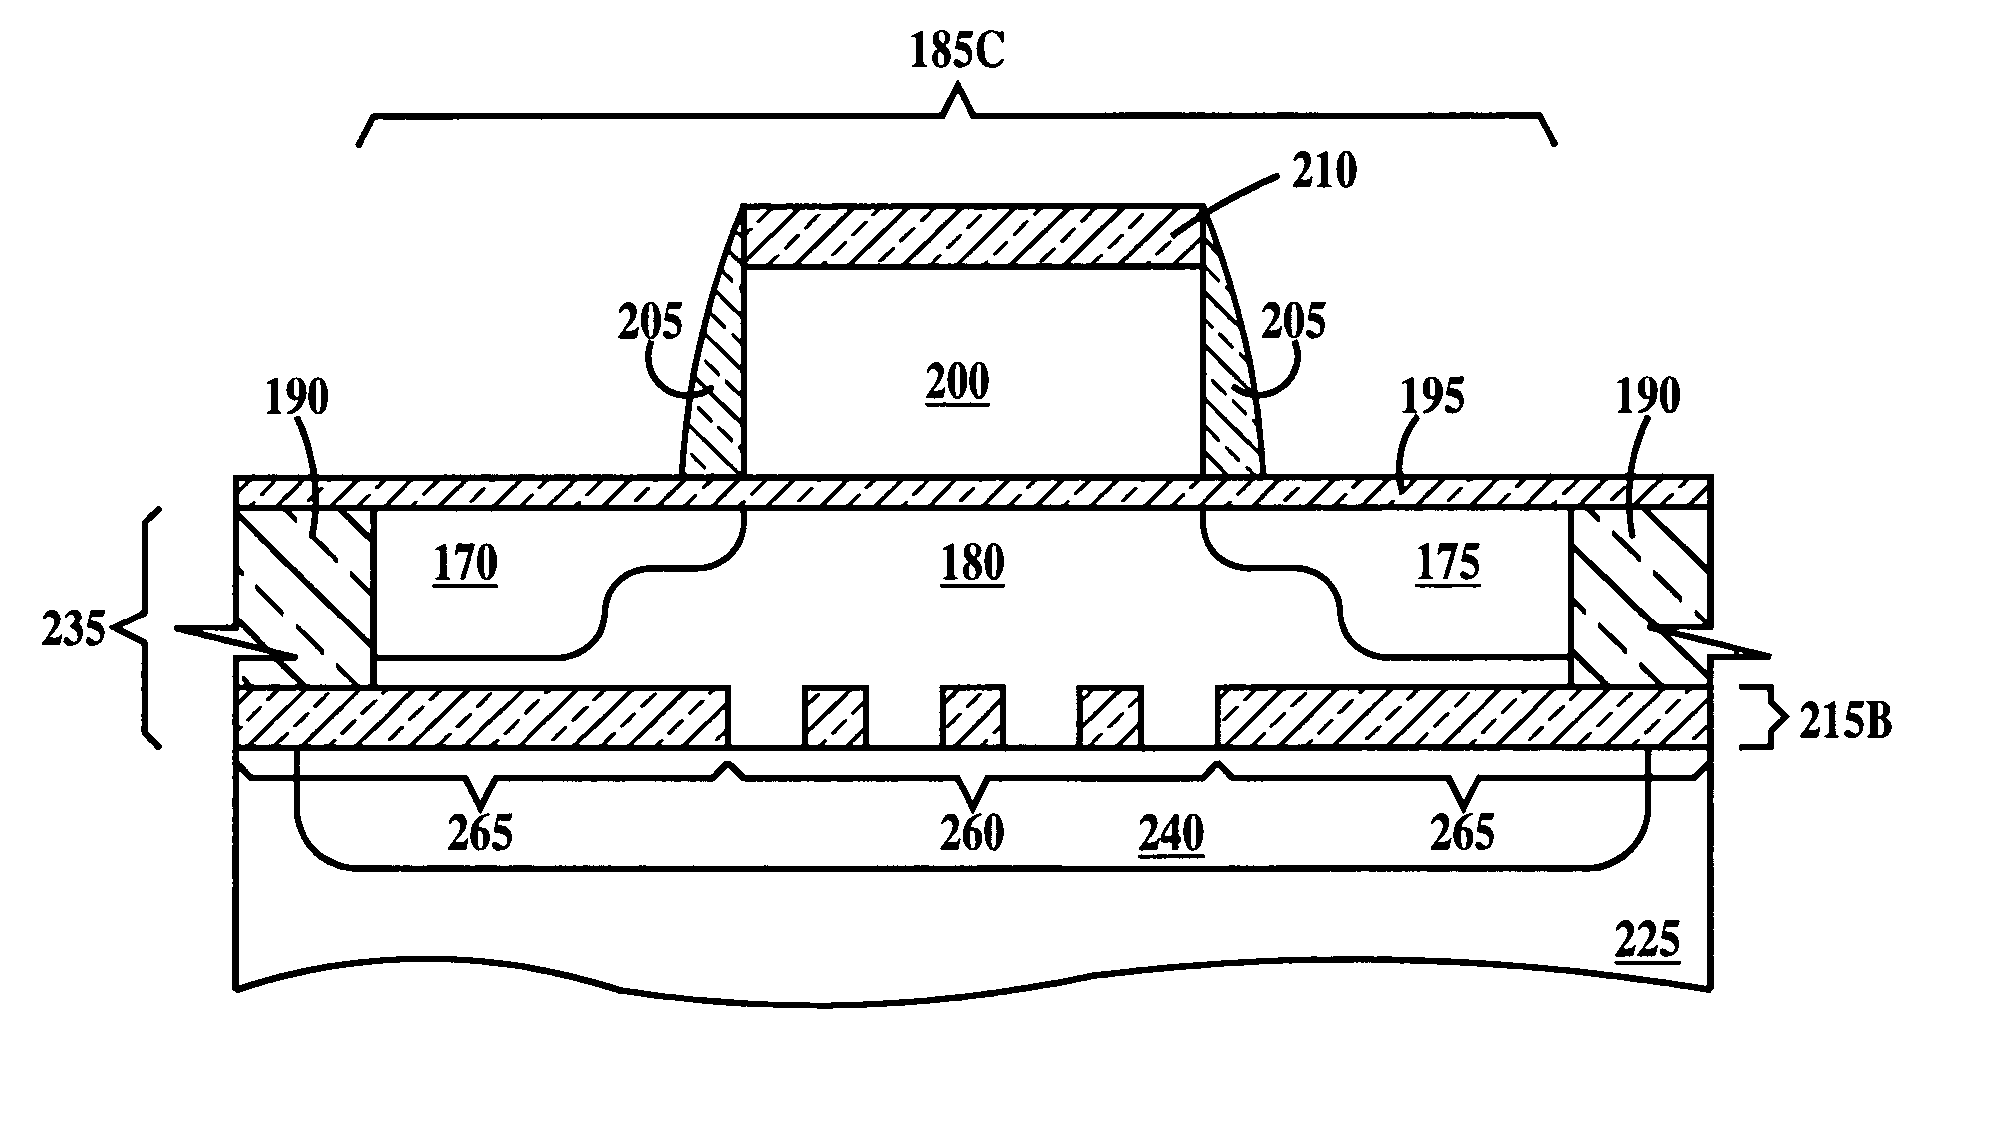 Method of forming buried isolation regions in semiconductor substrates and semiconductor devices with buried isolation regions